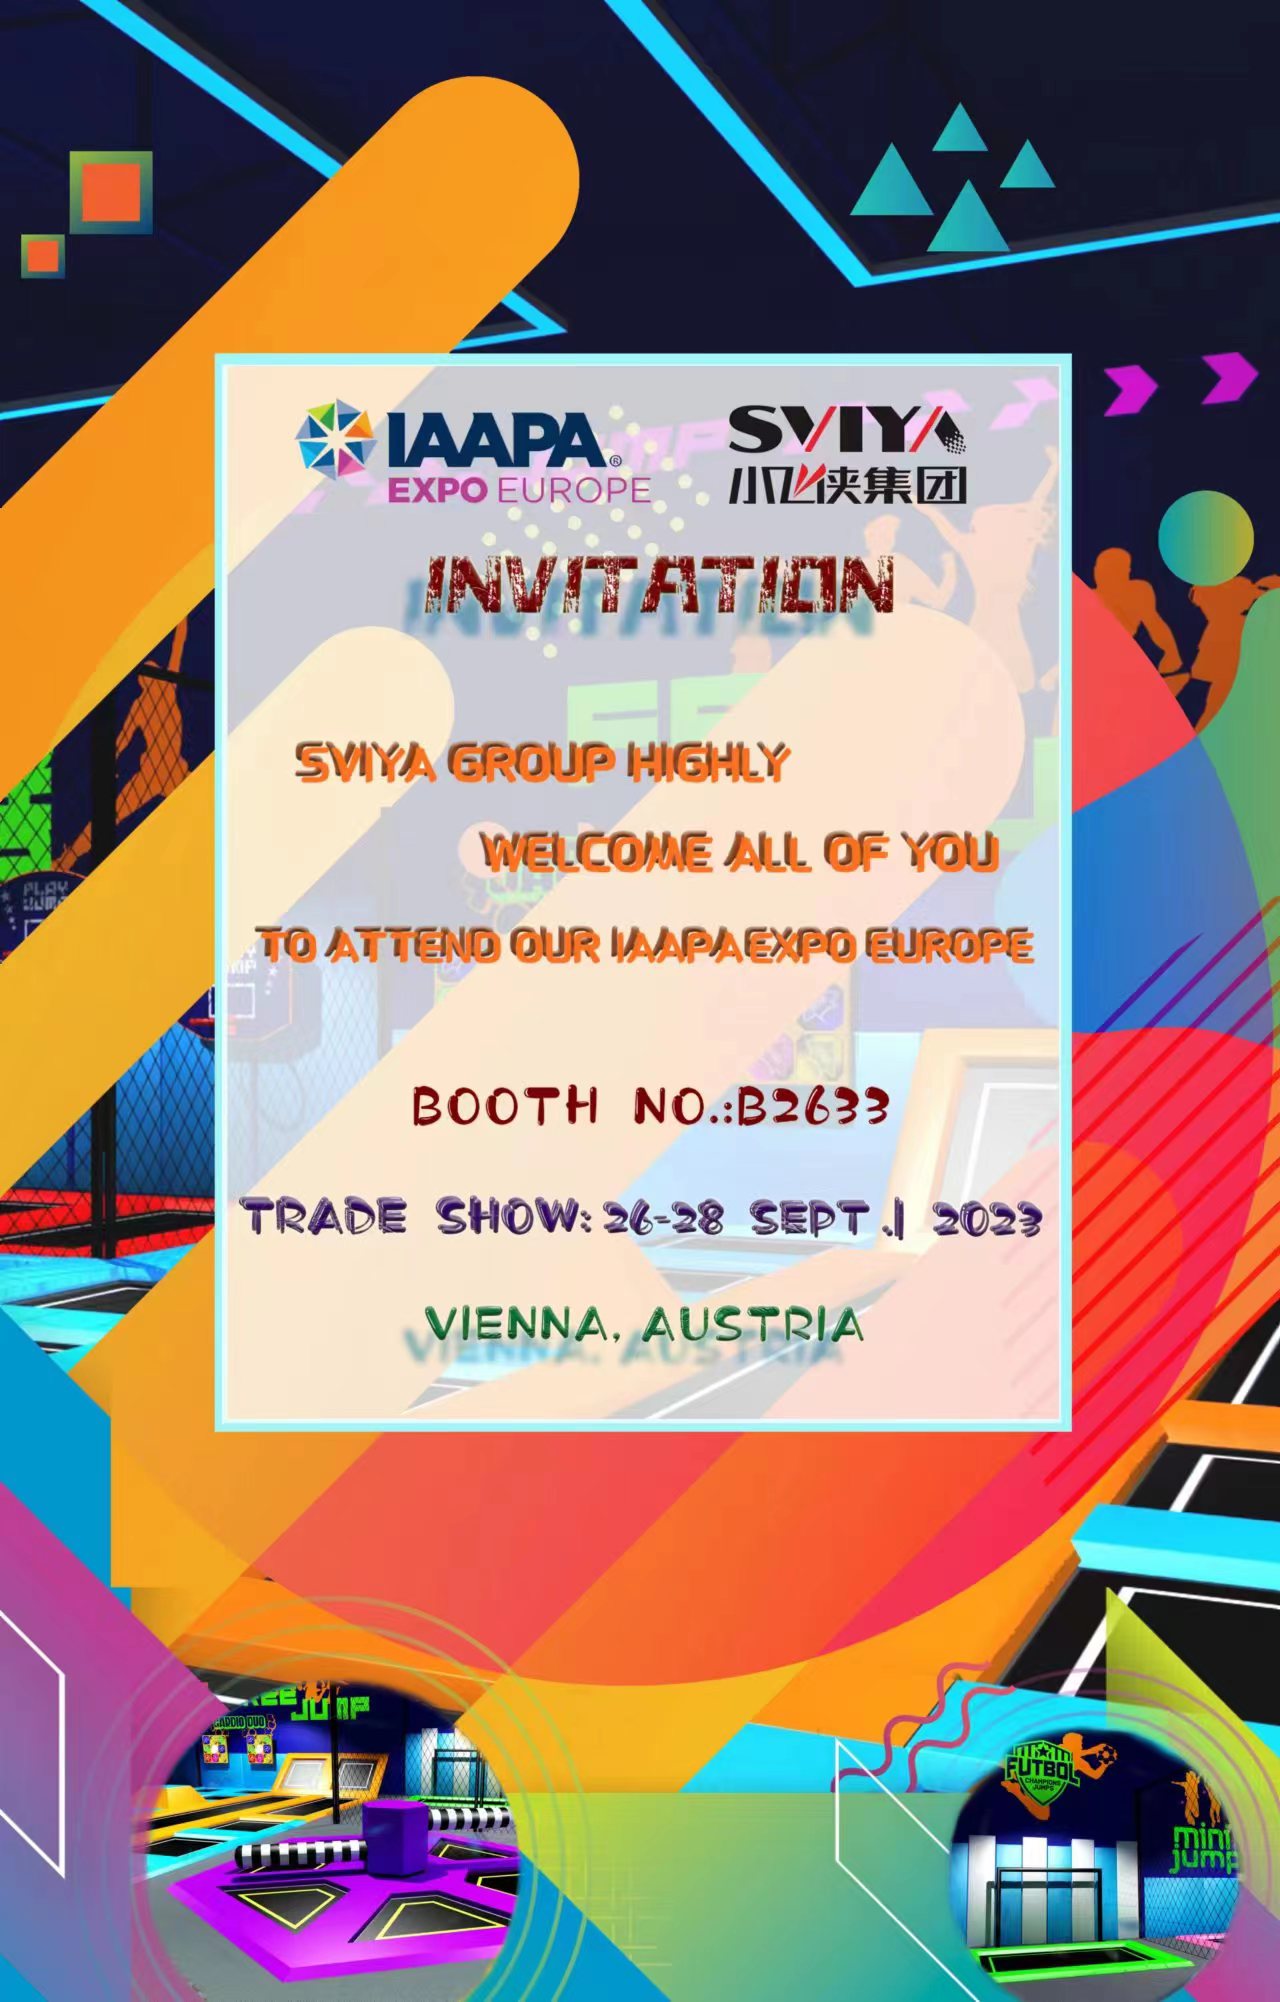 SVIYA Group Highly Welcome You to Come to Meet Us at IAAPA EXPO Europe 2023